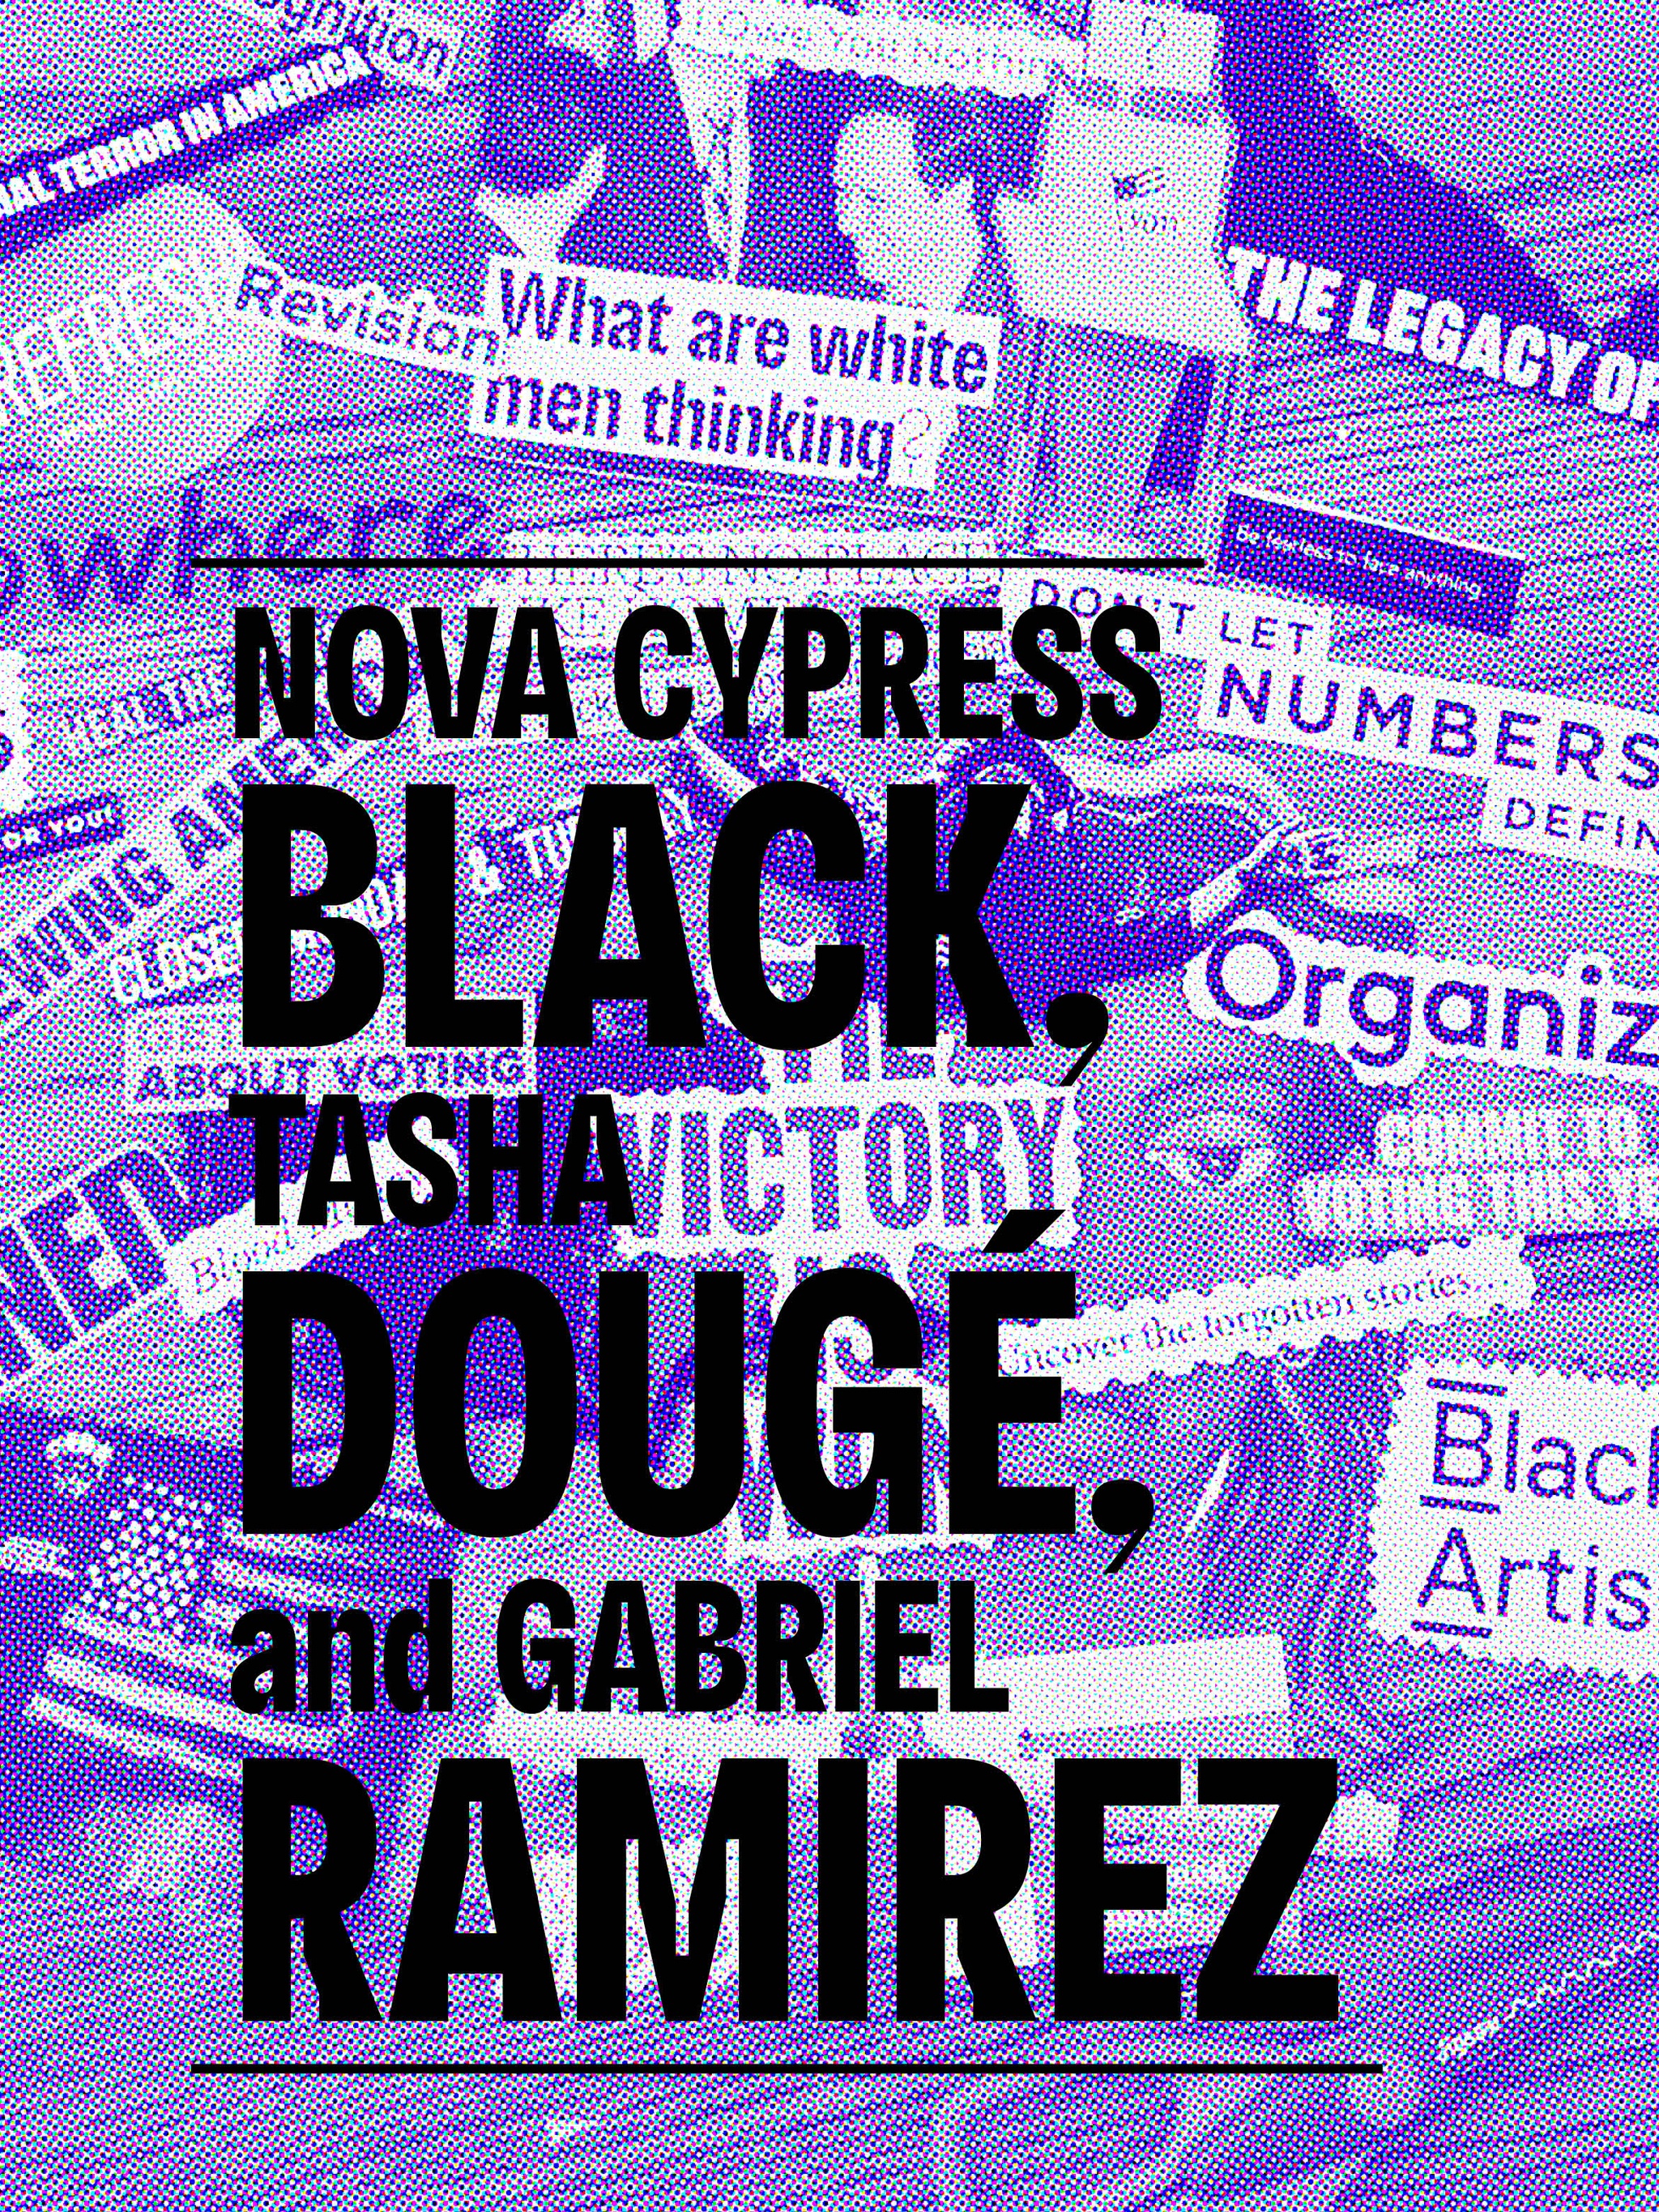 An image of snippets of words and images and scissors on a wooden floor. The image is treated with a purple wash with the names Nova Cypress Black, Tasha Dougé, and Gabriel Ramirez superimposed.